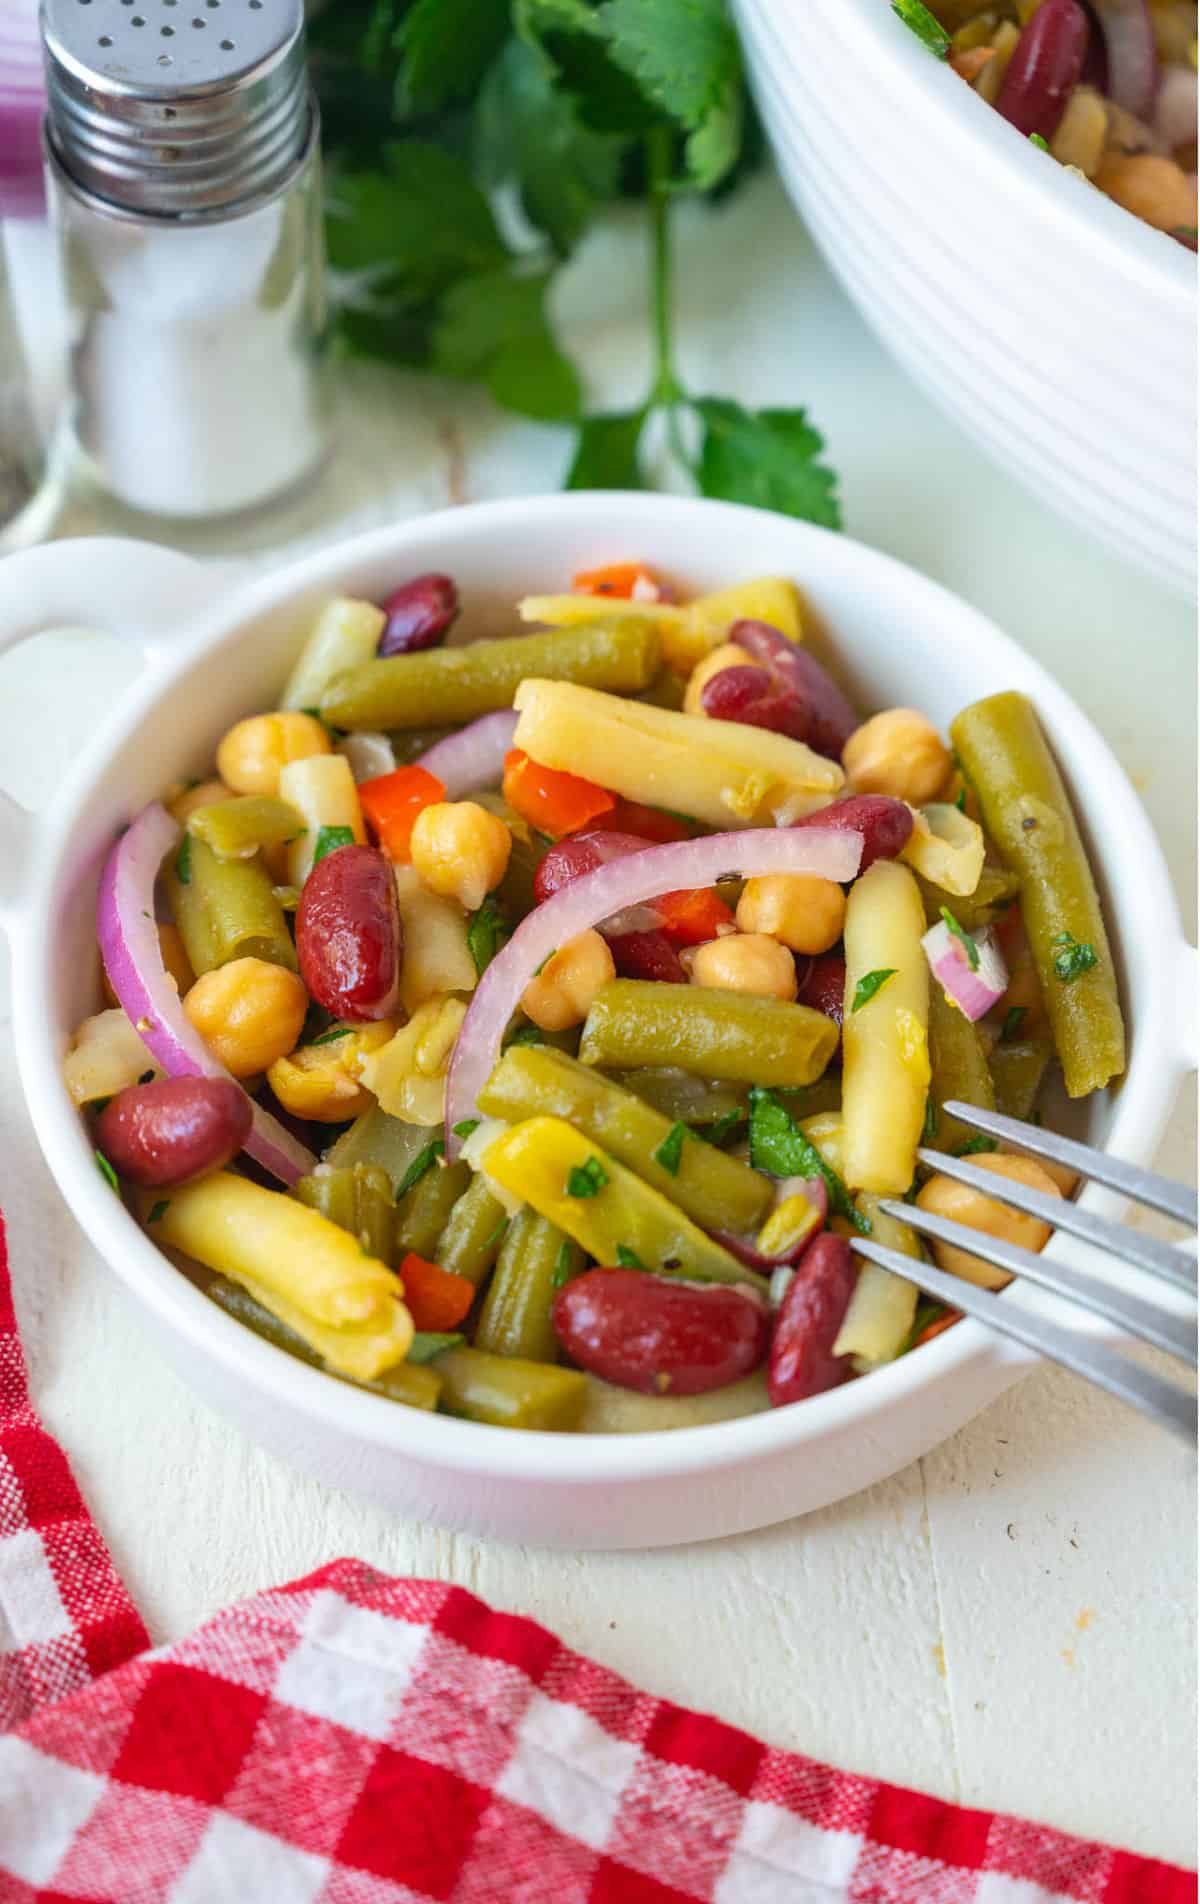 A serving of bean salad in a small bowl.